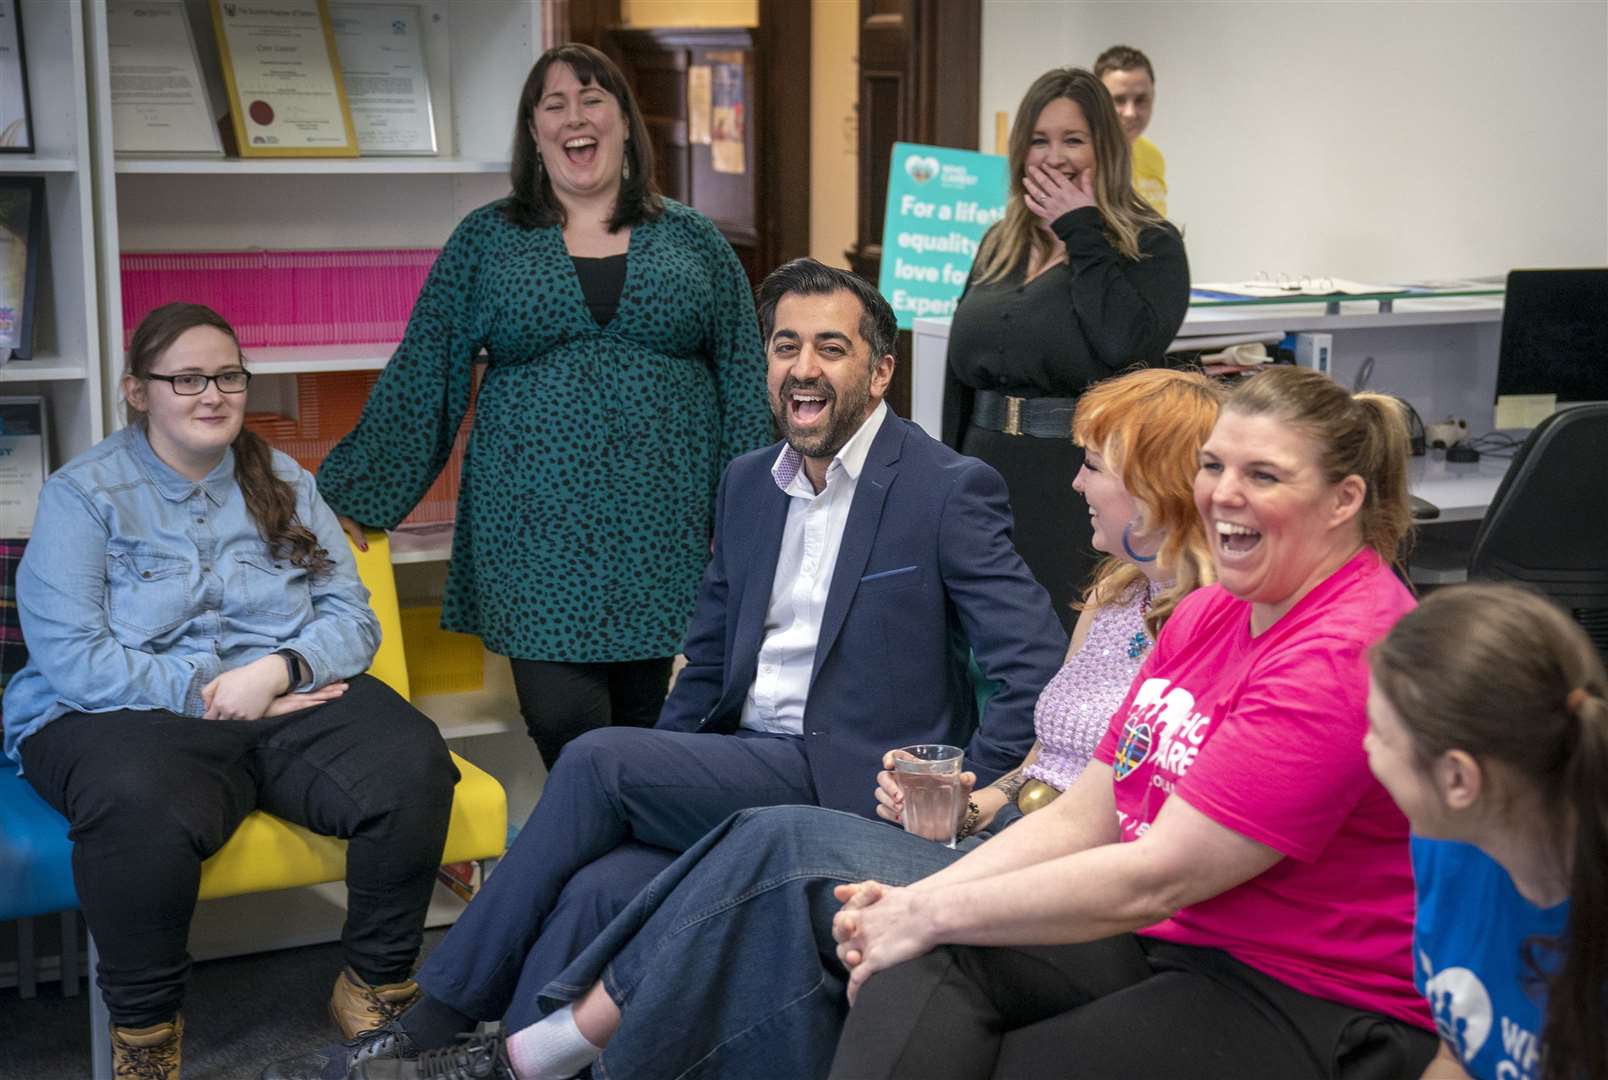 Humza Yousaf has a laugh with volunteers at Who Cares? Scotland in Glasgow (Jane Barlow/PA)